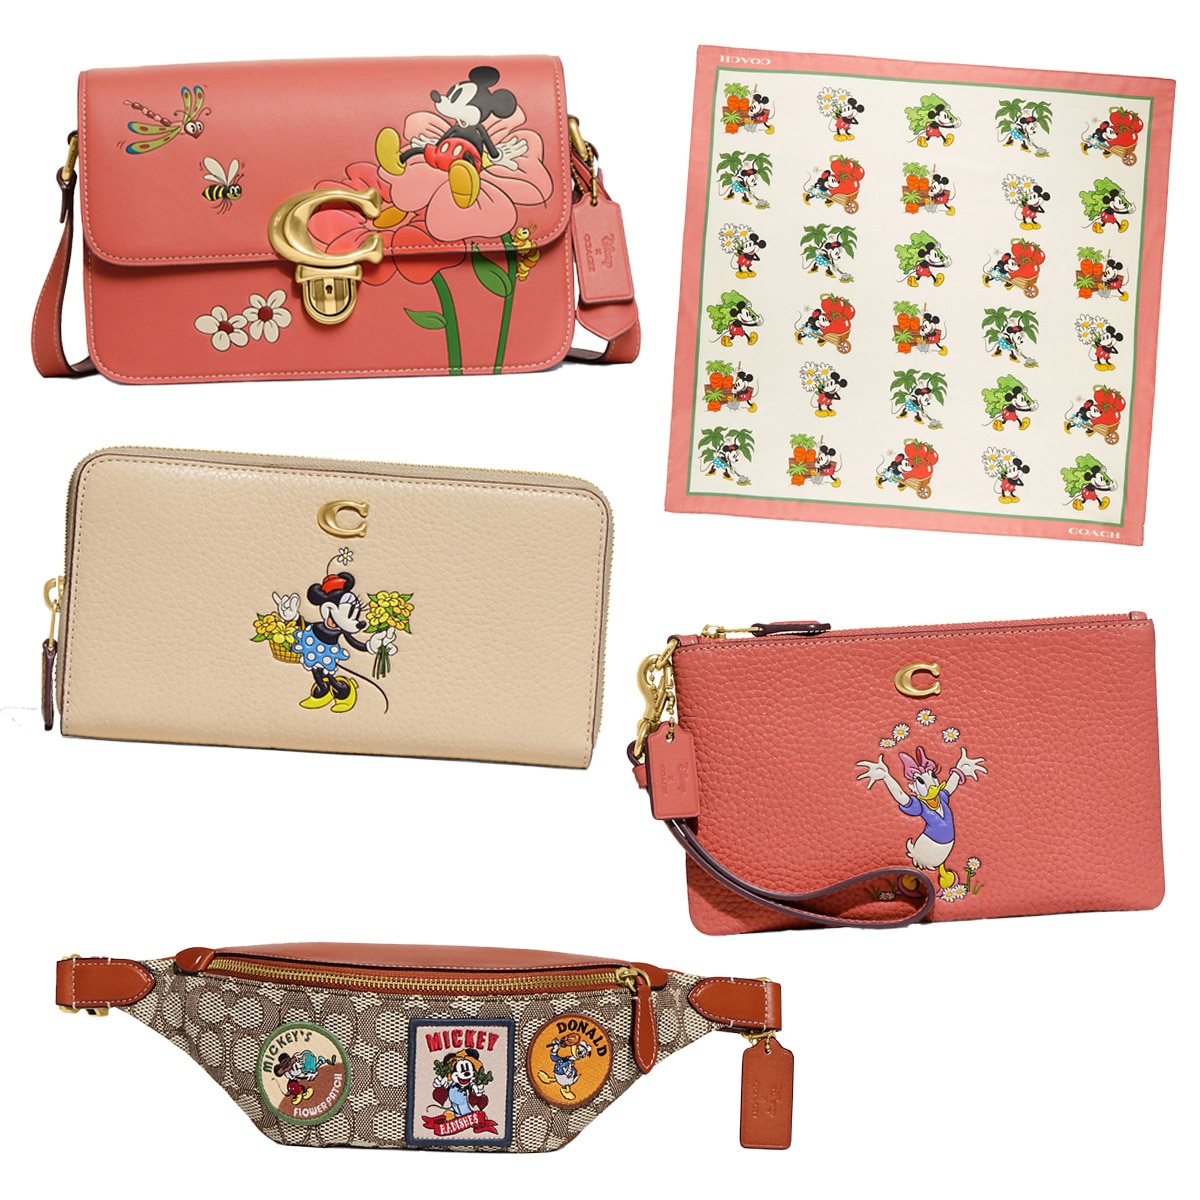 New Coach Disney Collection, Minnie Mouse Inspired